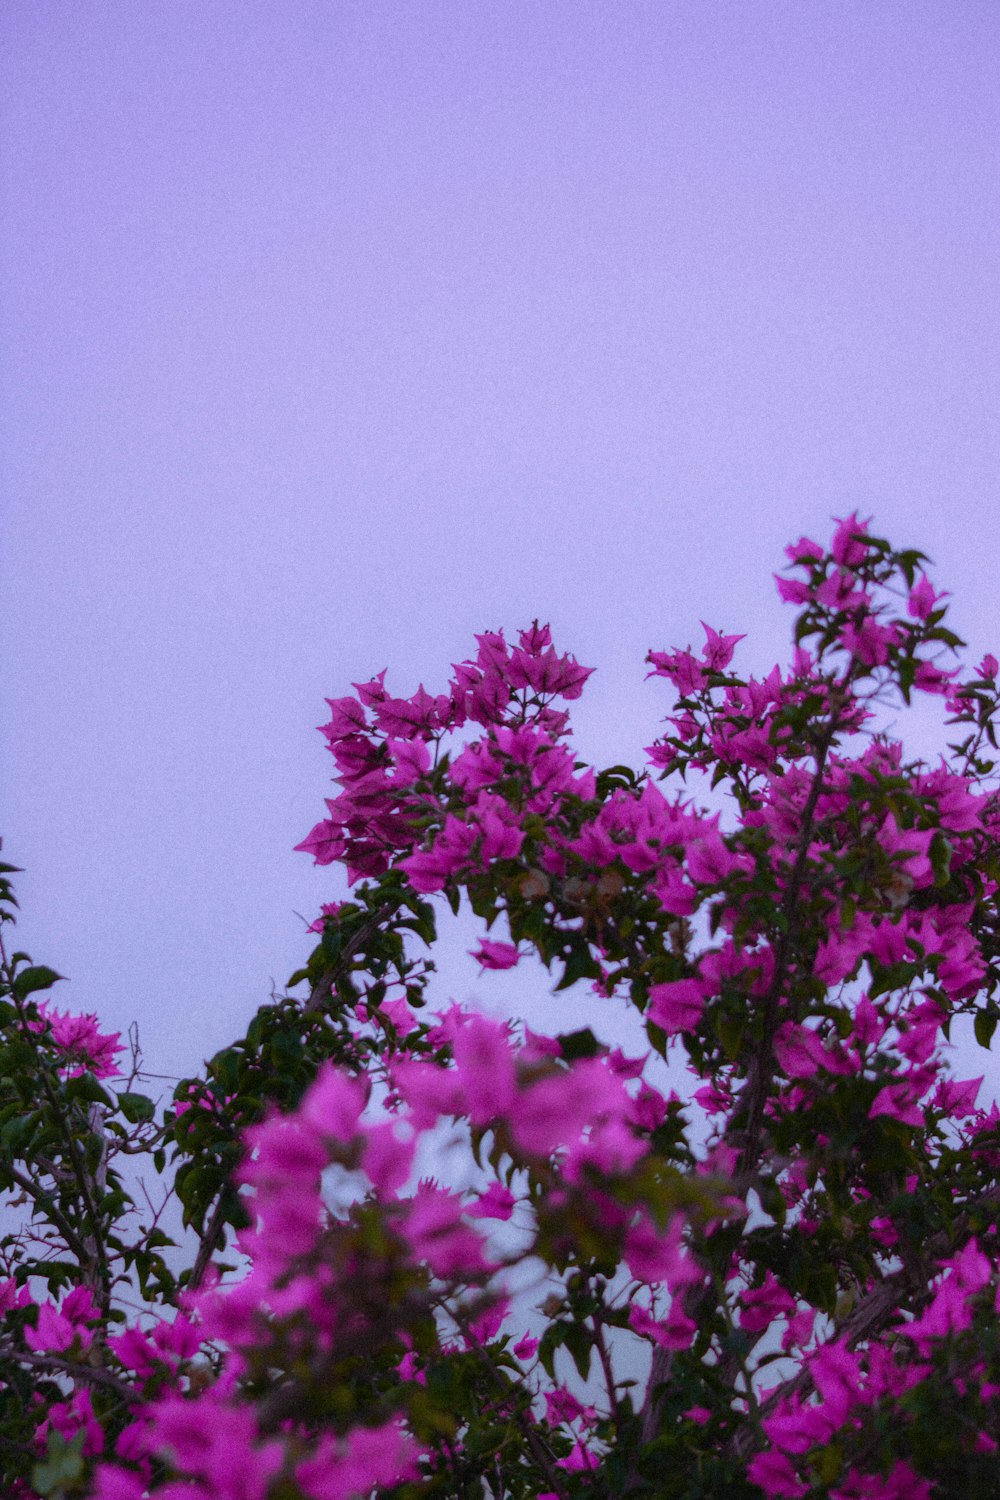 a bird sitting on top of a tree filled with purple flowers